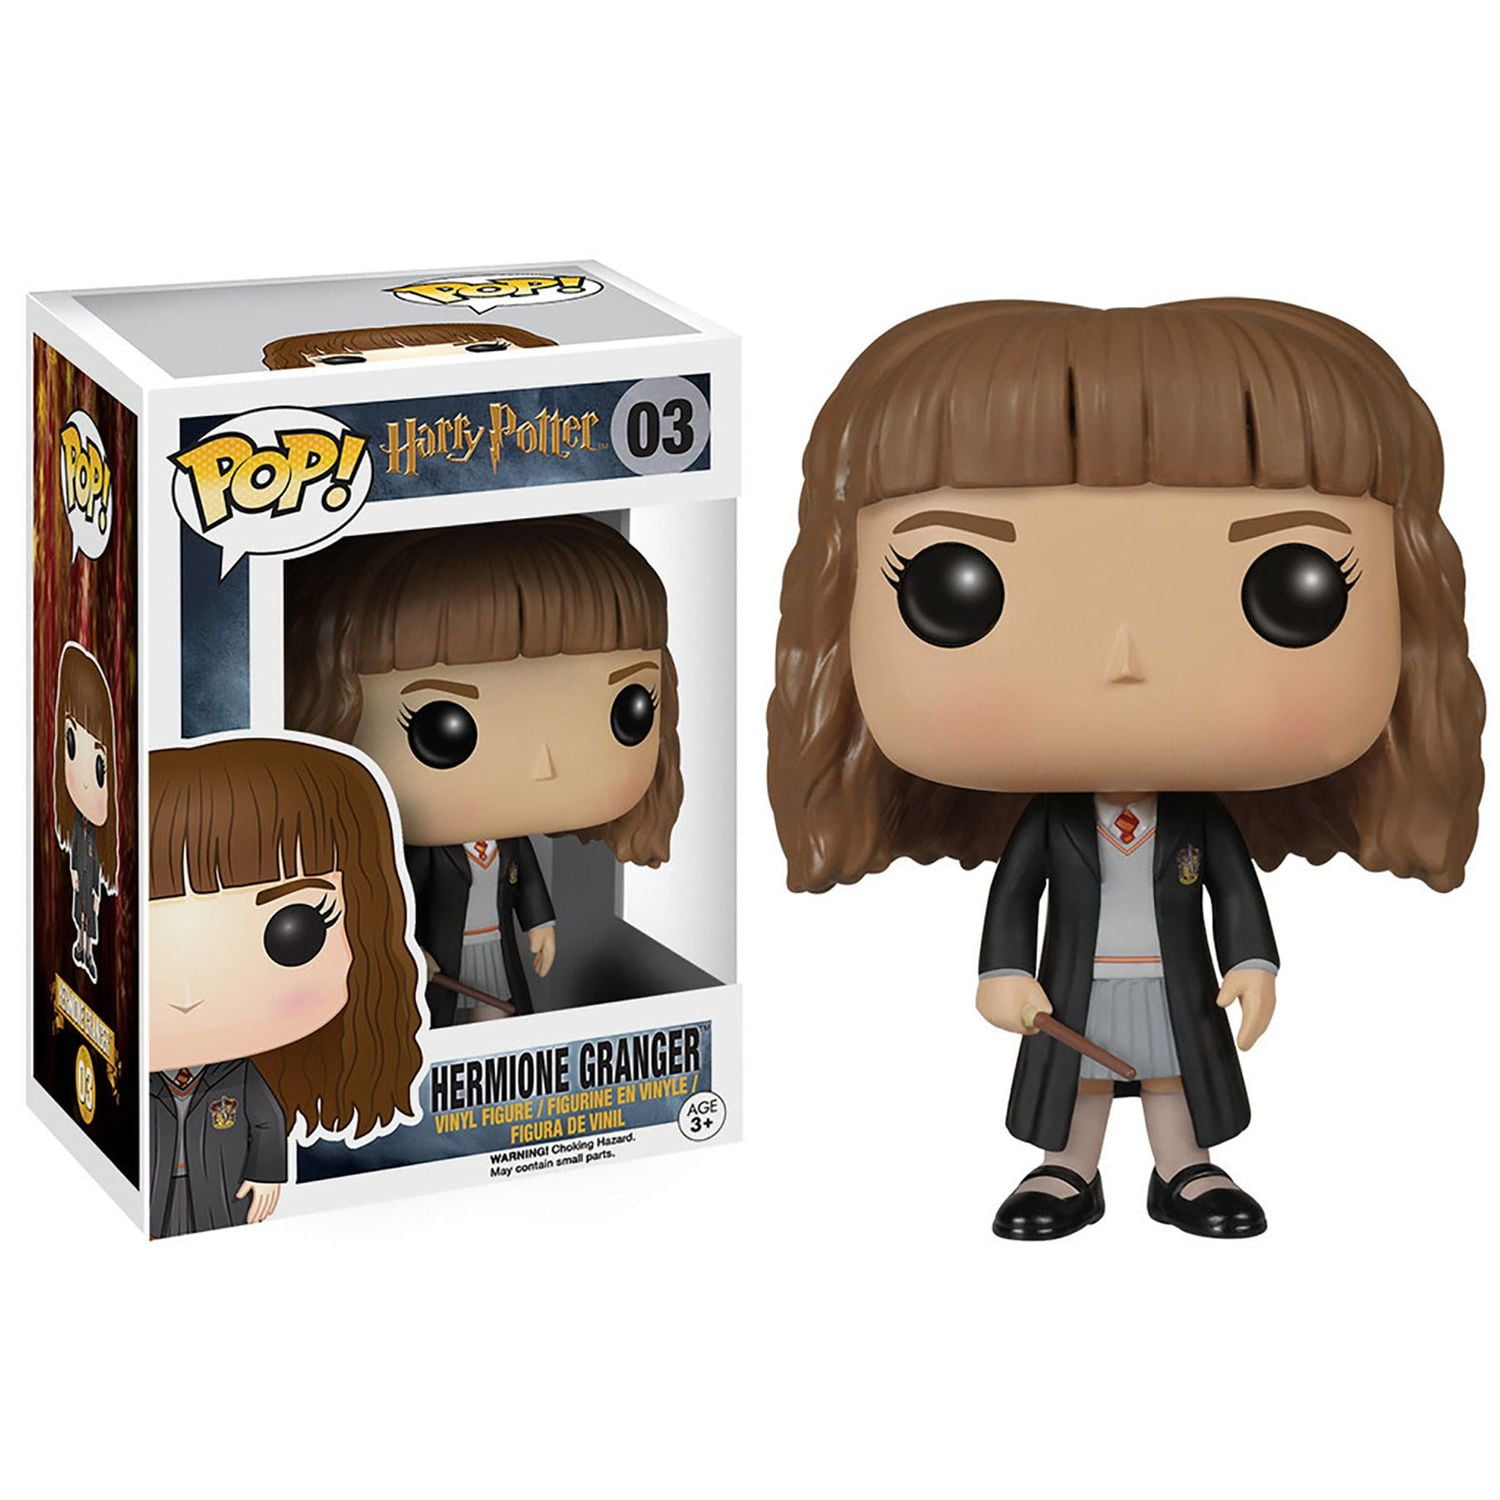 Funko 14937 Pop! Harry Potter Hermione Granger with Time Turner